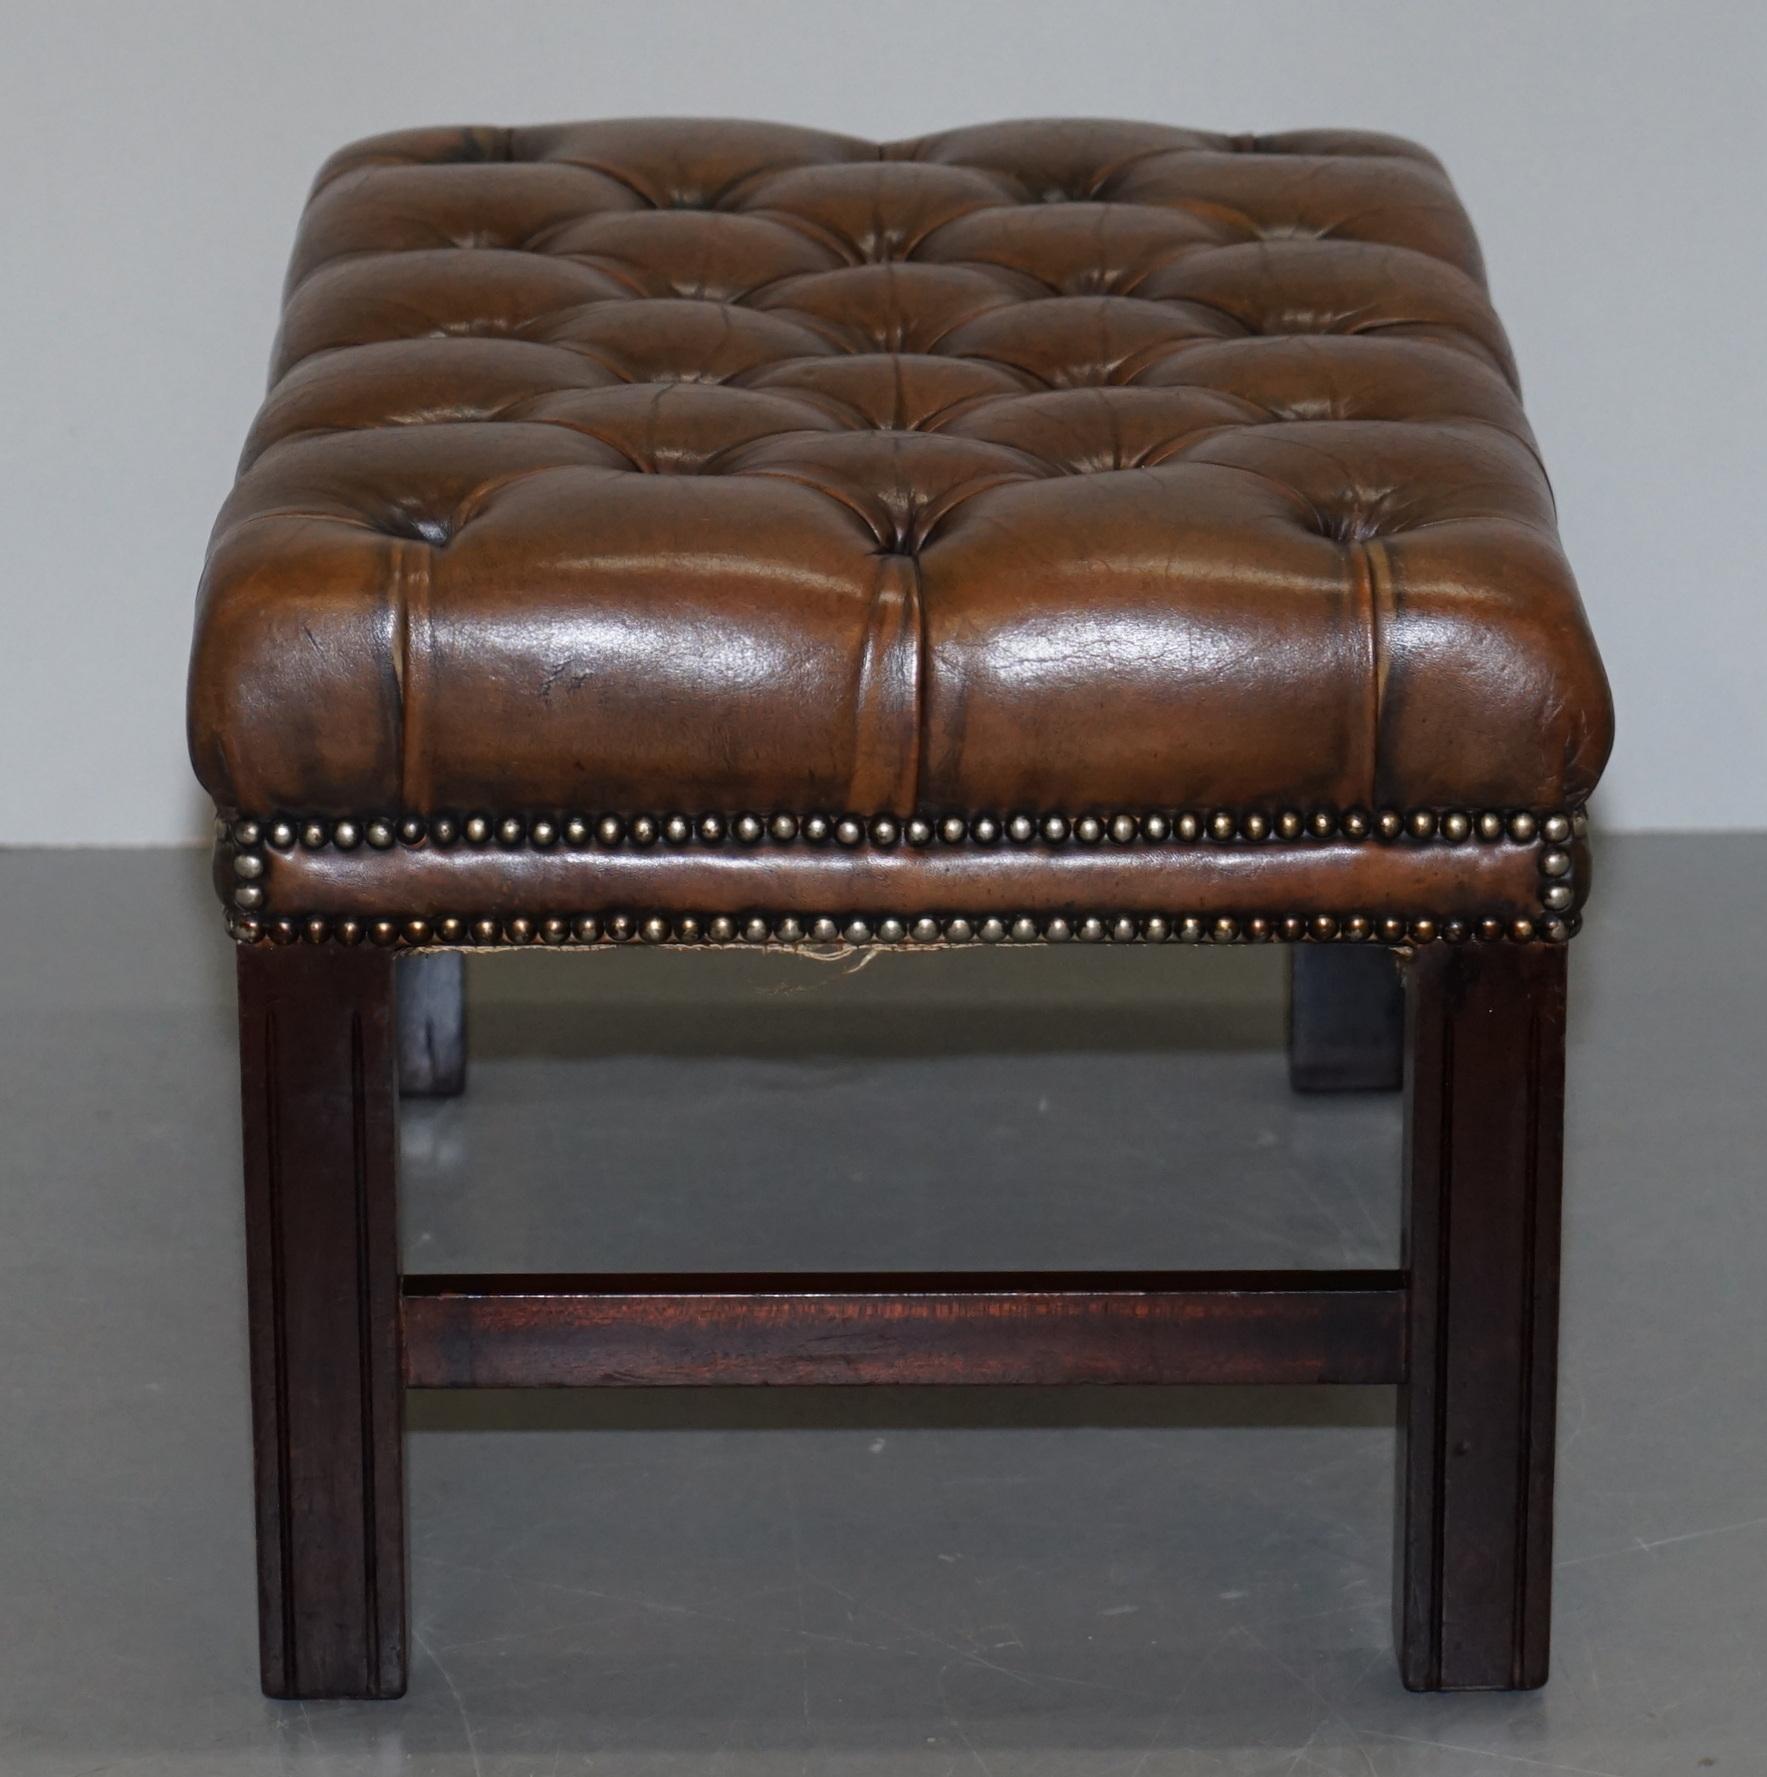 Hand-Crafted Lovely Vintage Hand Dyed Brown Leather Large Chesterfield Tufted Footstool